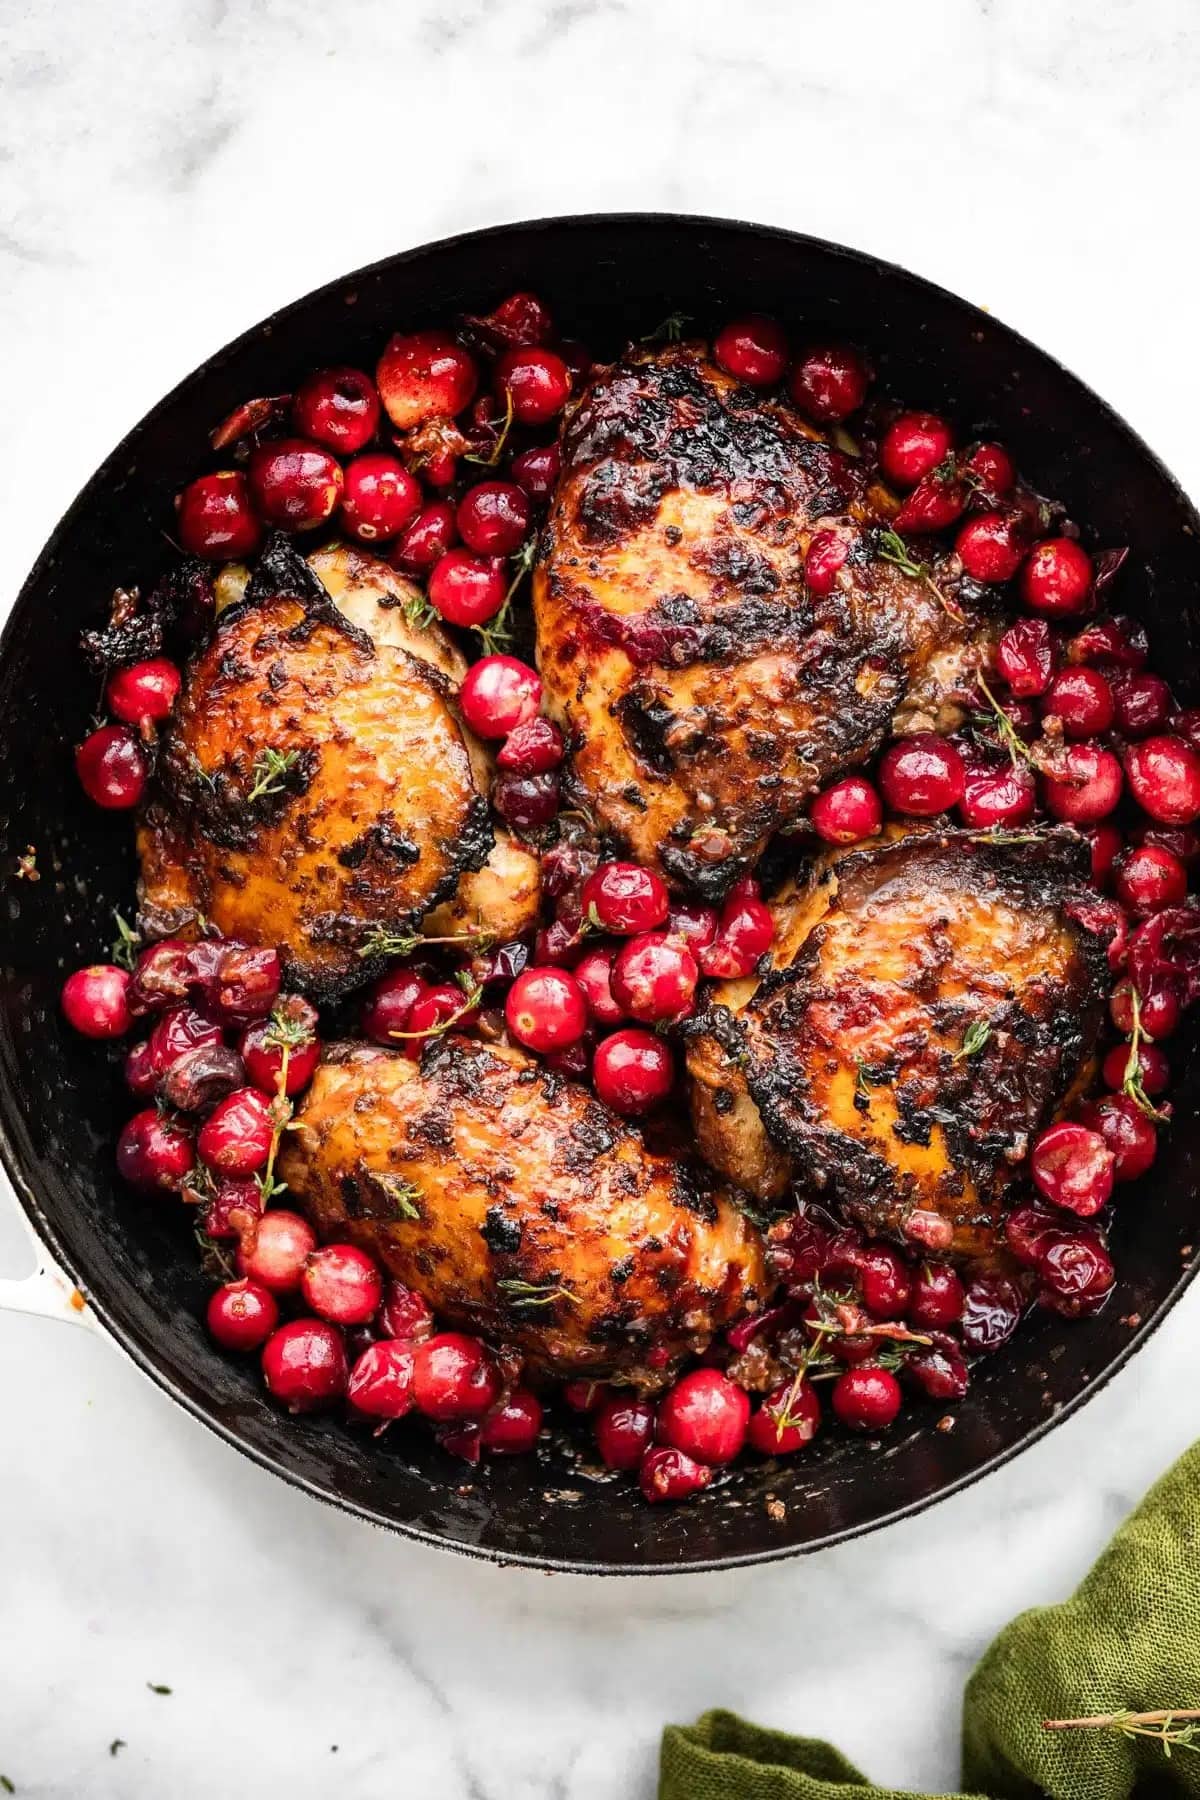 Roasted chicken with cranberry and herbs cooked on a skillet.